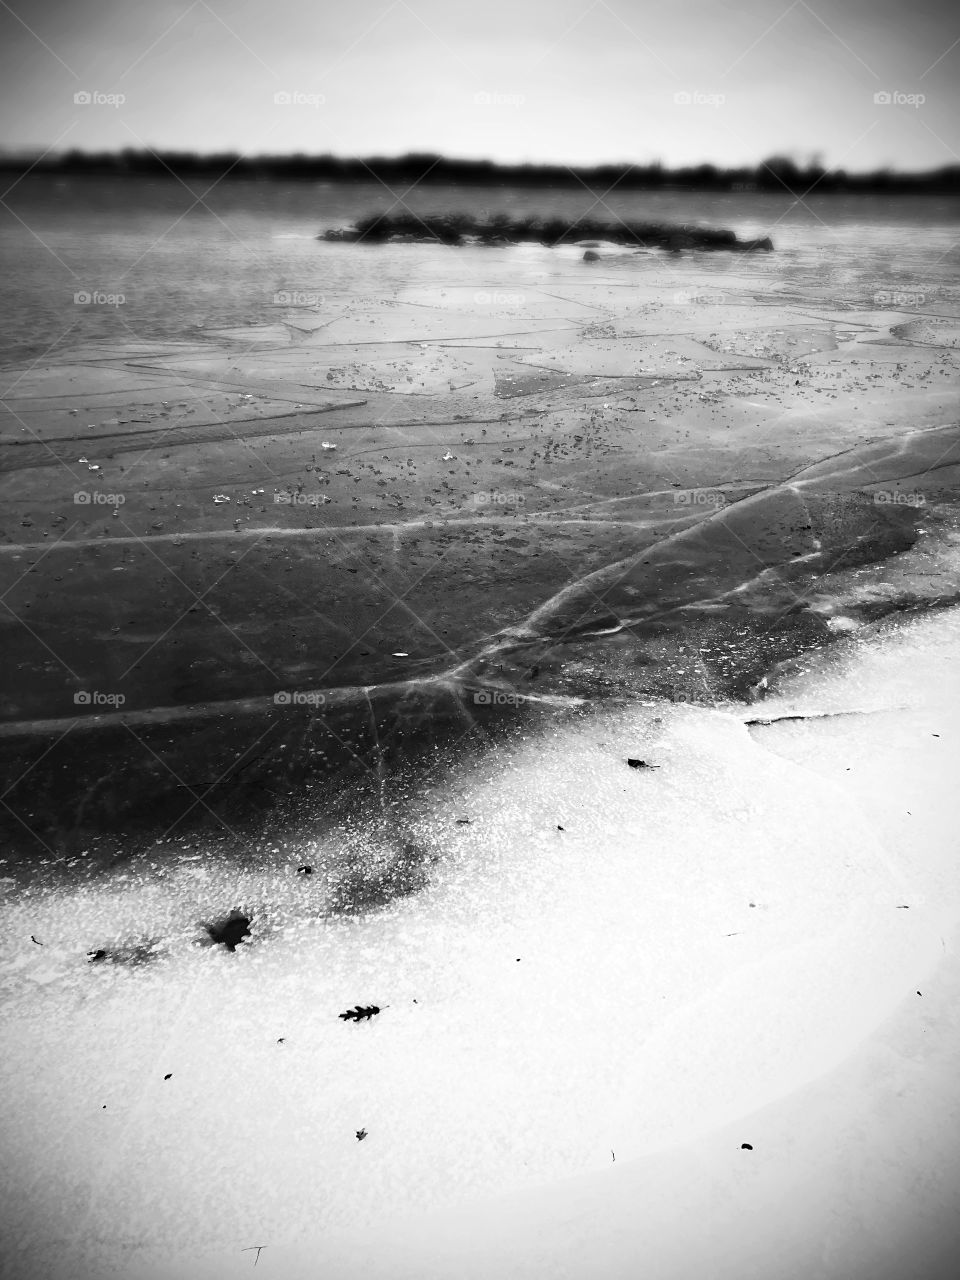 A vast river of ice. The contrast focusses on the fissures where strength was overcome but not broken. 